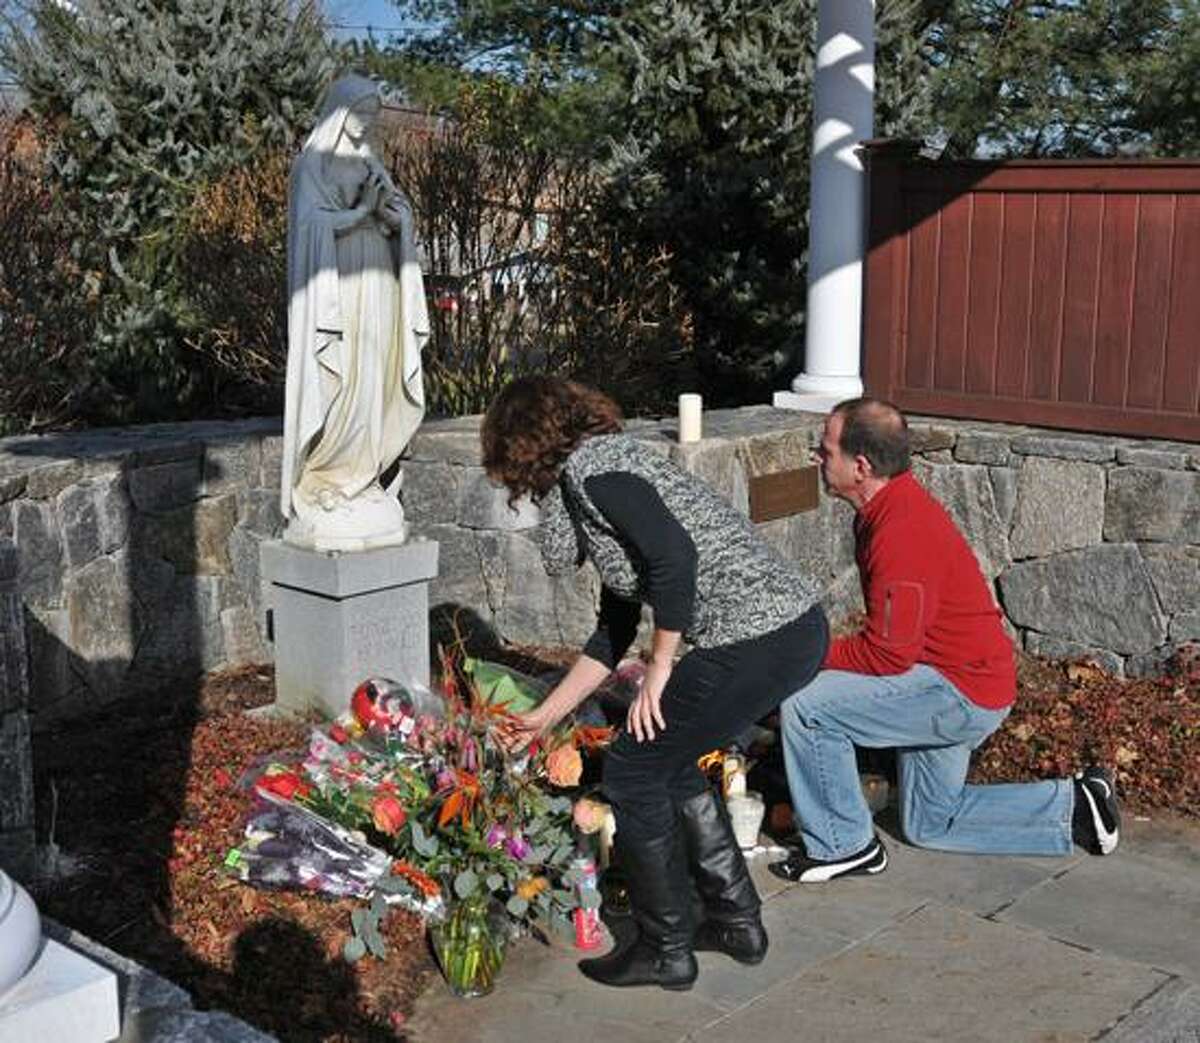 Randy and Paul Convertito of Brookfield place flowers at a statue outside the St. Rose of Lima Church in Newtown. Peter Casolino/New Haven Register